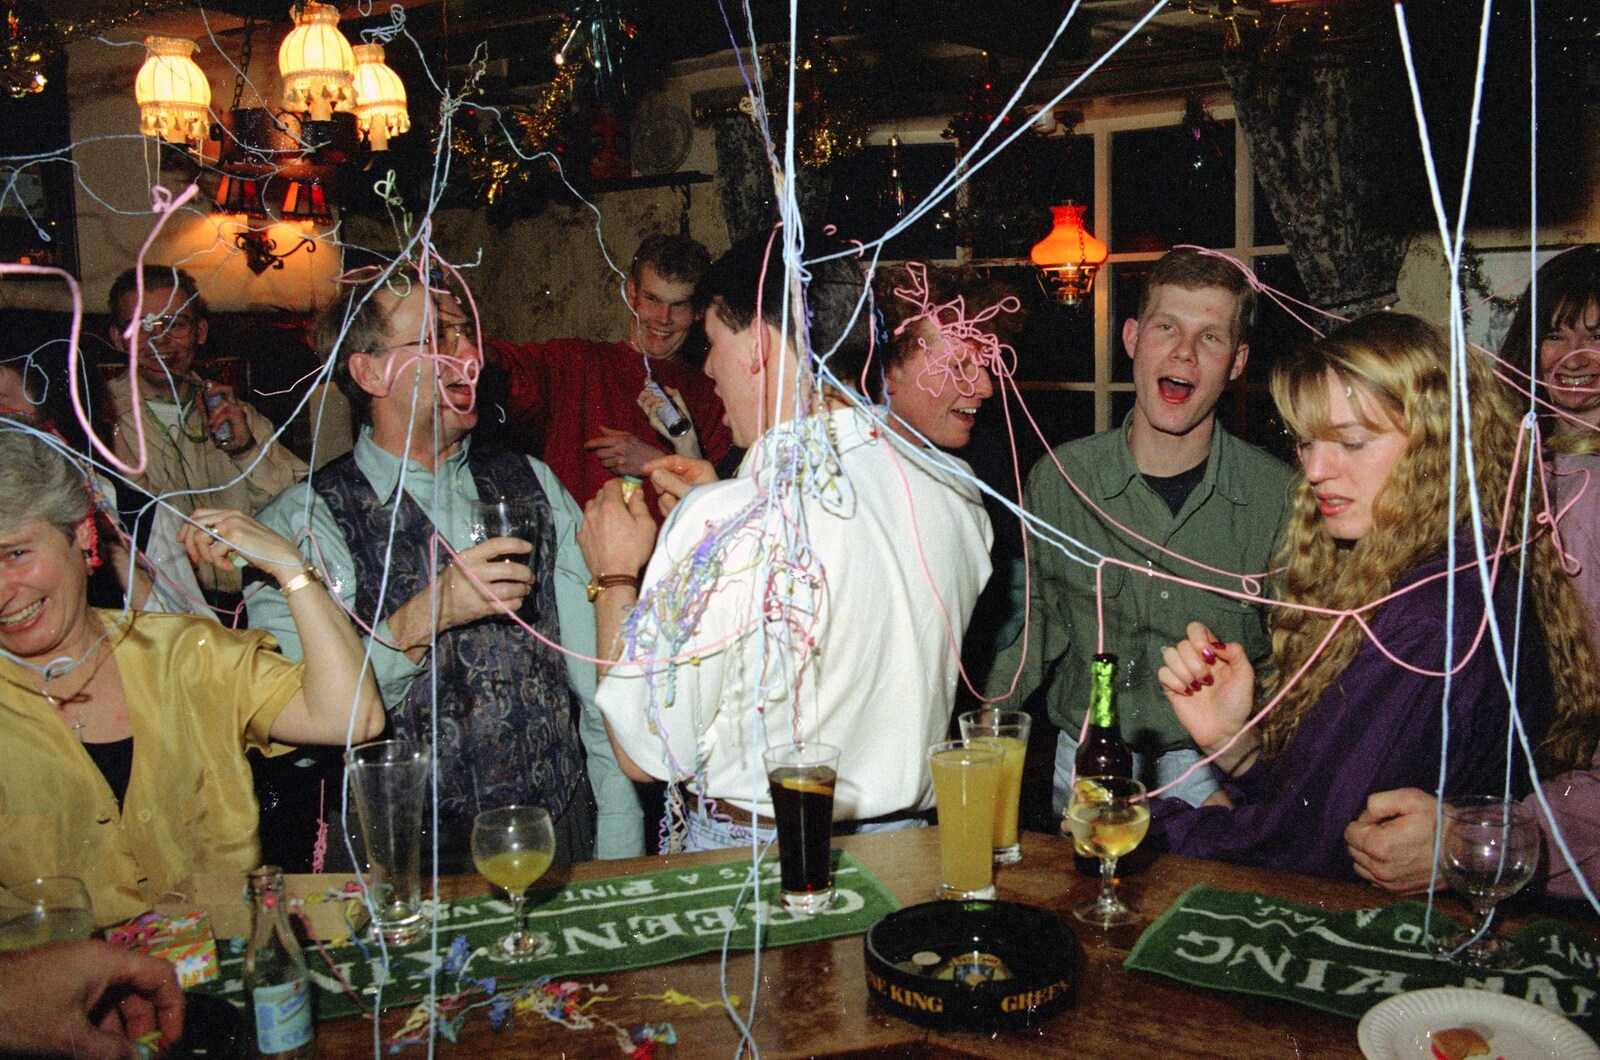 Party-popper aftermath from New Year's Eve at the Swan Inn, Brome, Suffolk - 31st December 1994